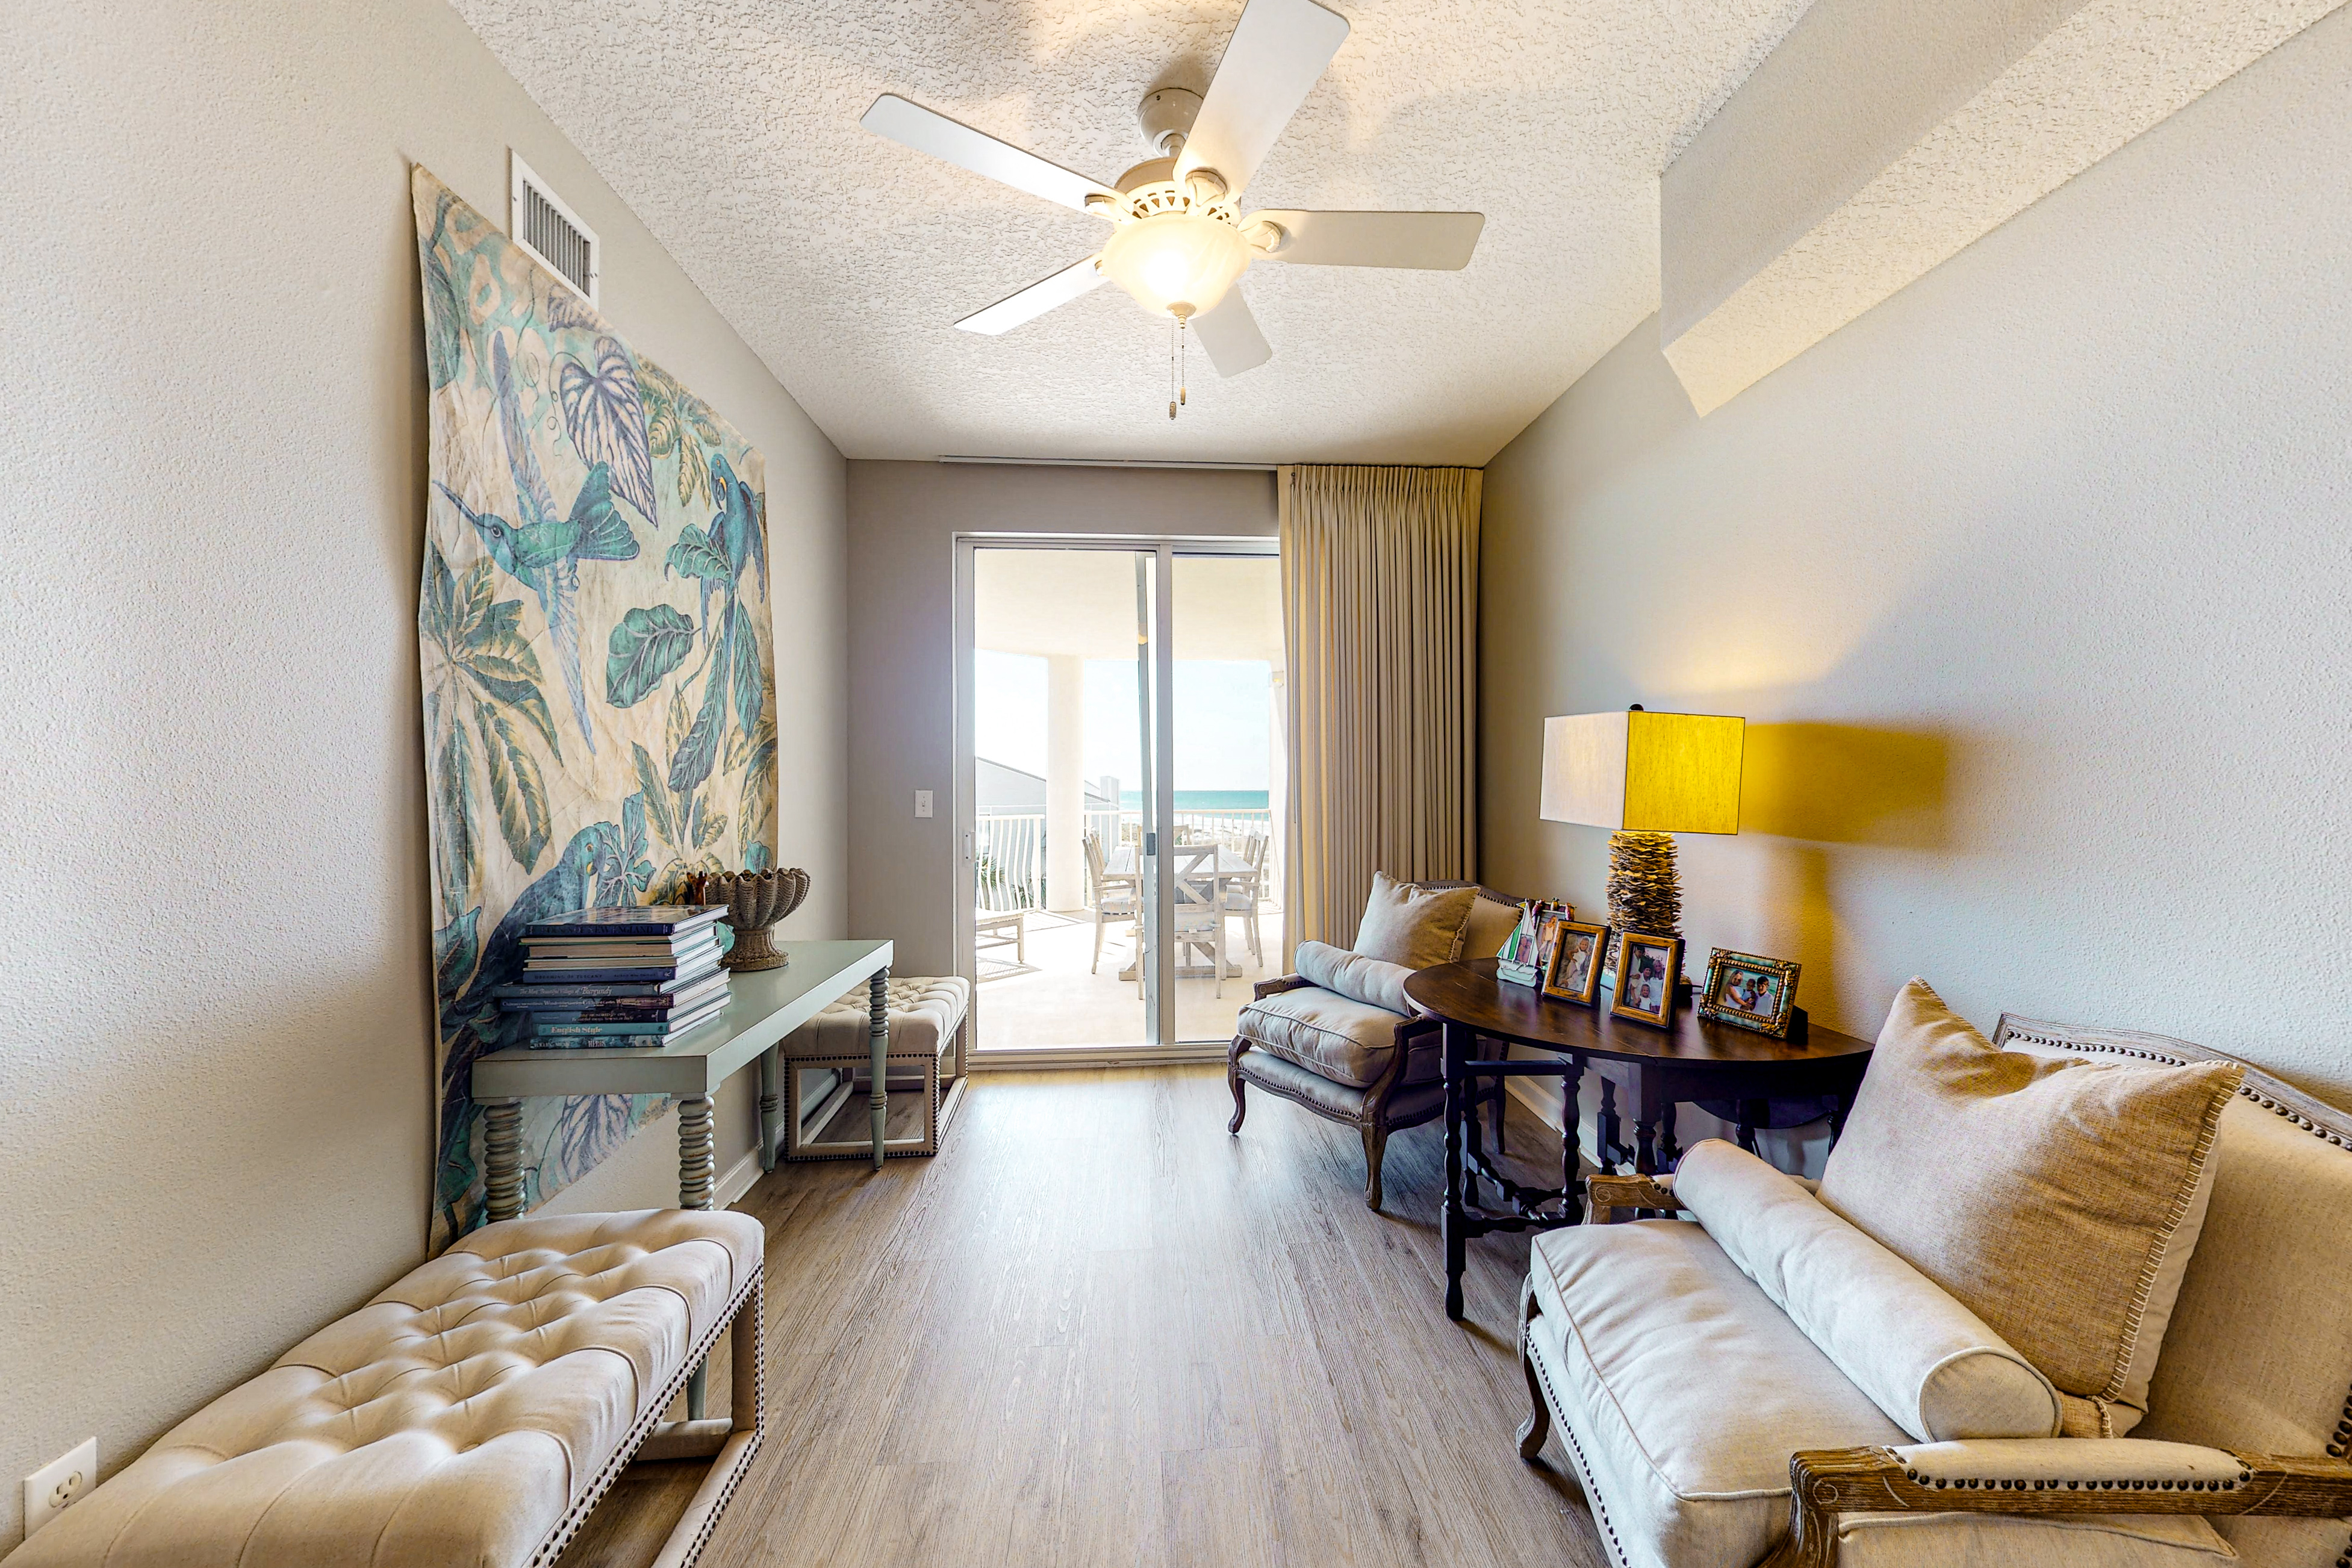 Dunes of Seagrove A301 Condo rental in Dunes of Seagrove in Highway 30-A Florida - #12